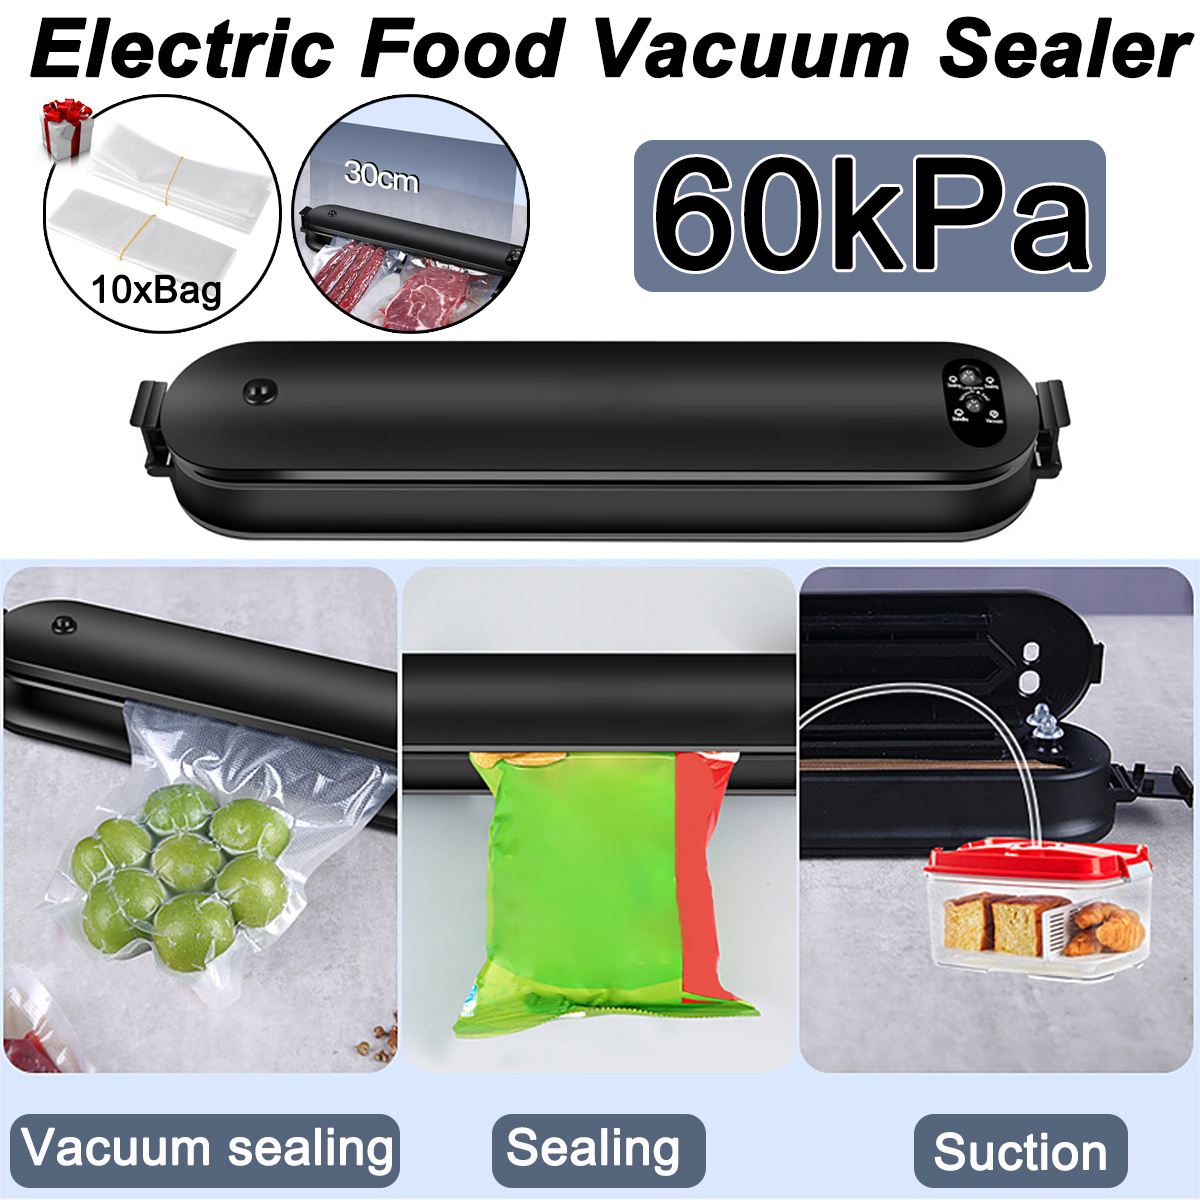 Electric-Food-Vacuum-Sealer-Powerful-Motor-Quick-Sealing-3-Fresh-keeping-Modes-for-Food-Preservation-1905323-1